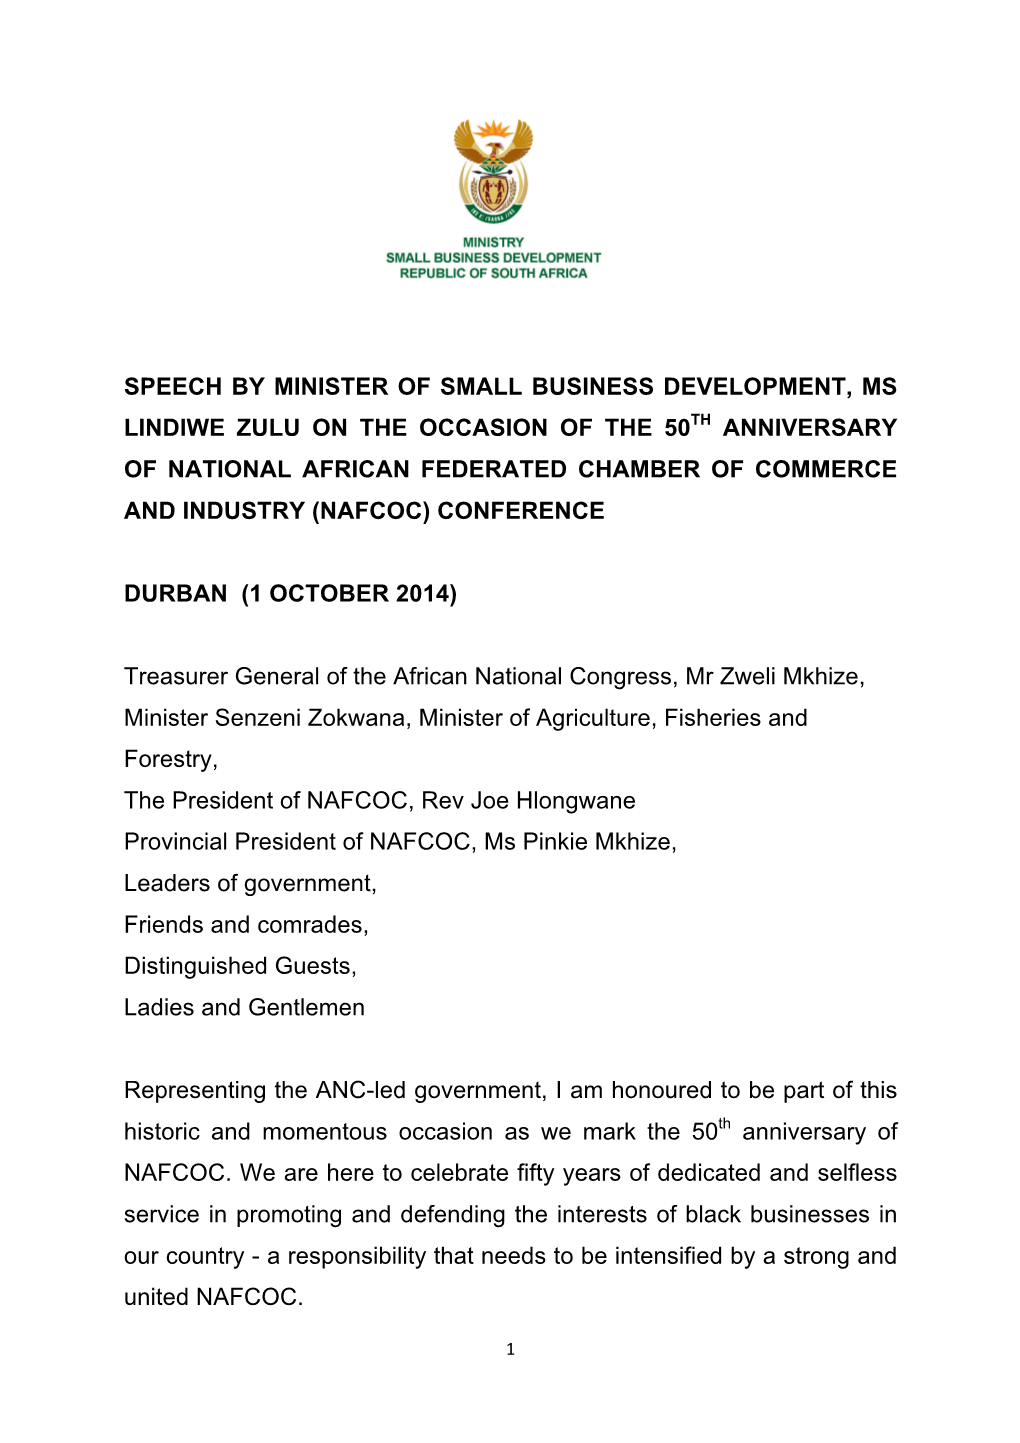 Speech by Minister of Small Business Development, Ms